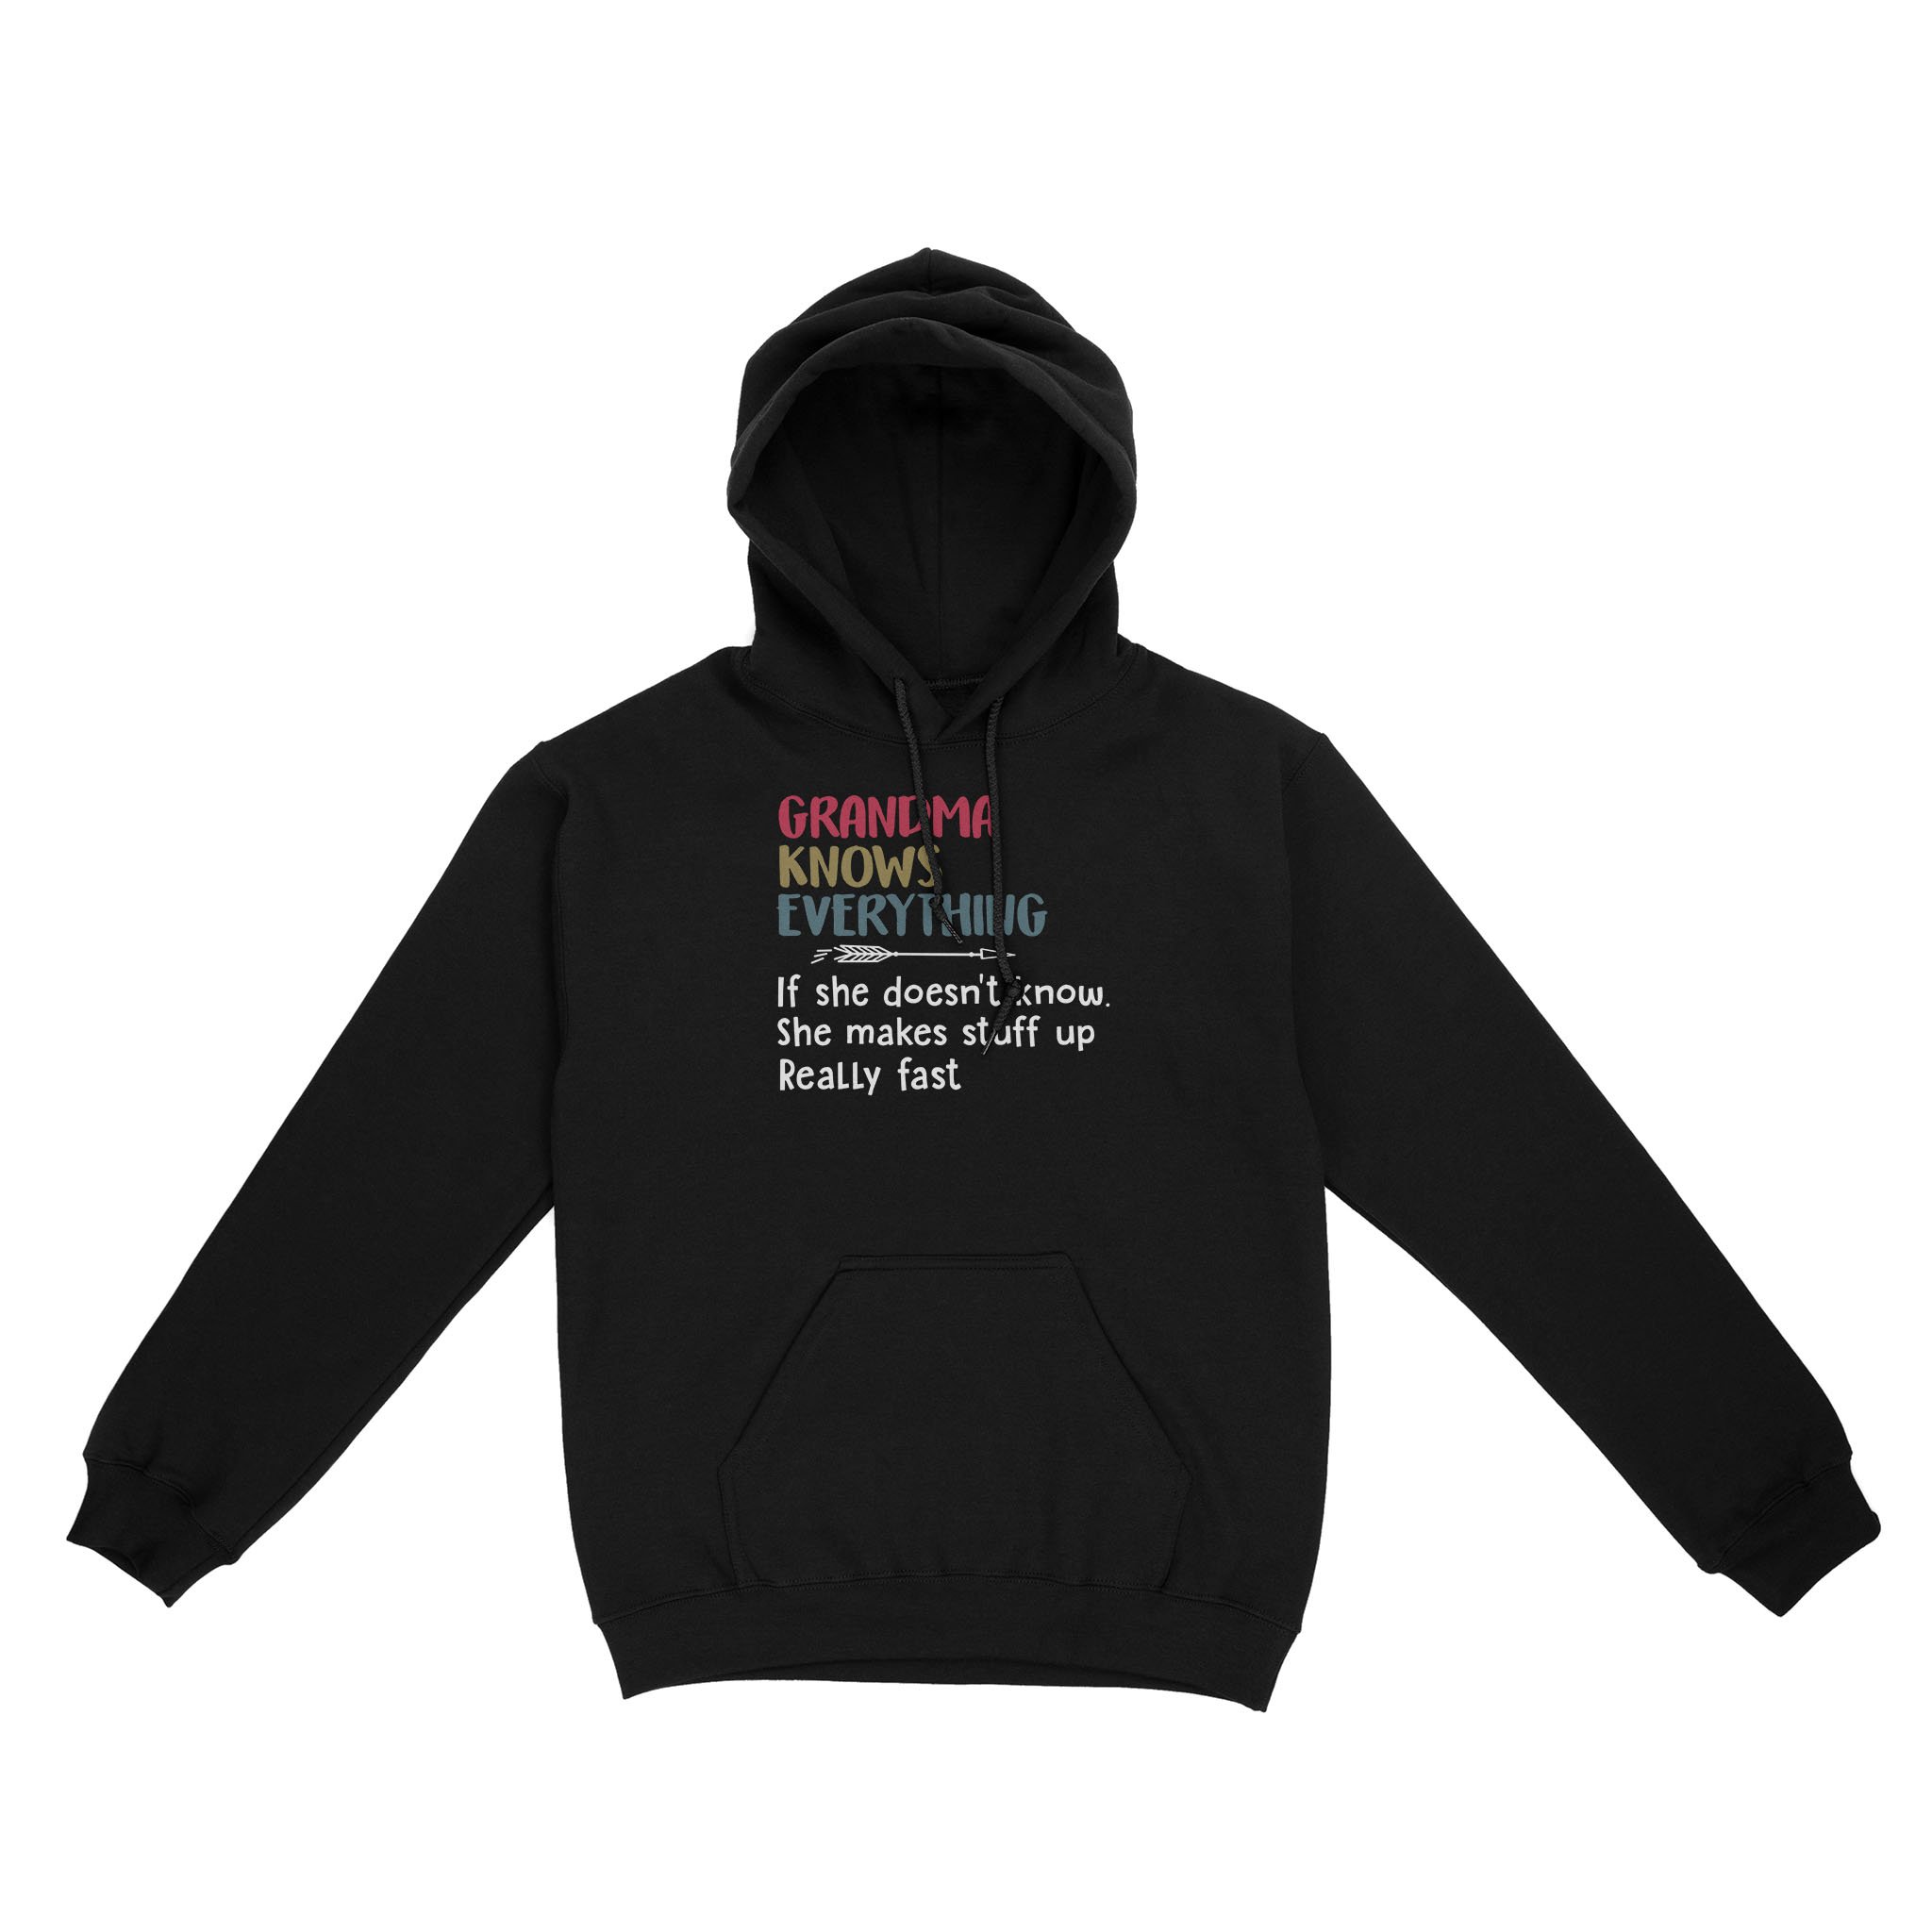 Grandma Knows Everything If She Doesn’t Know She Makes Stuff Up Really Fast Mother’s Day Shirt Gift For Mom – Standard Hoodie